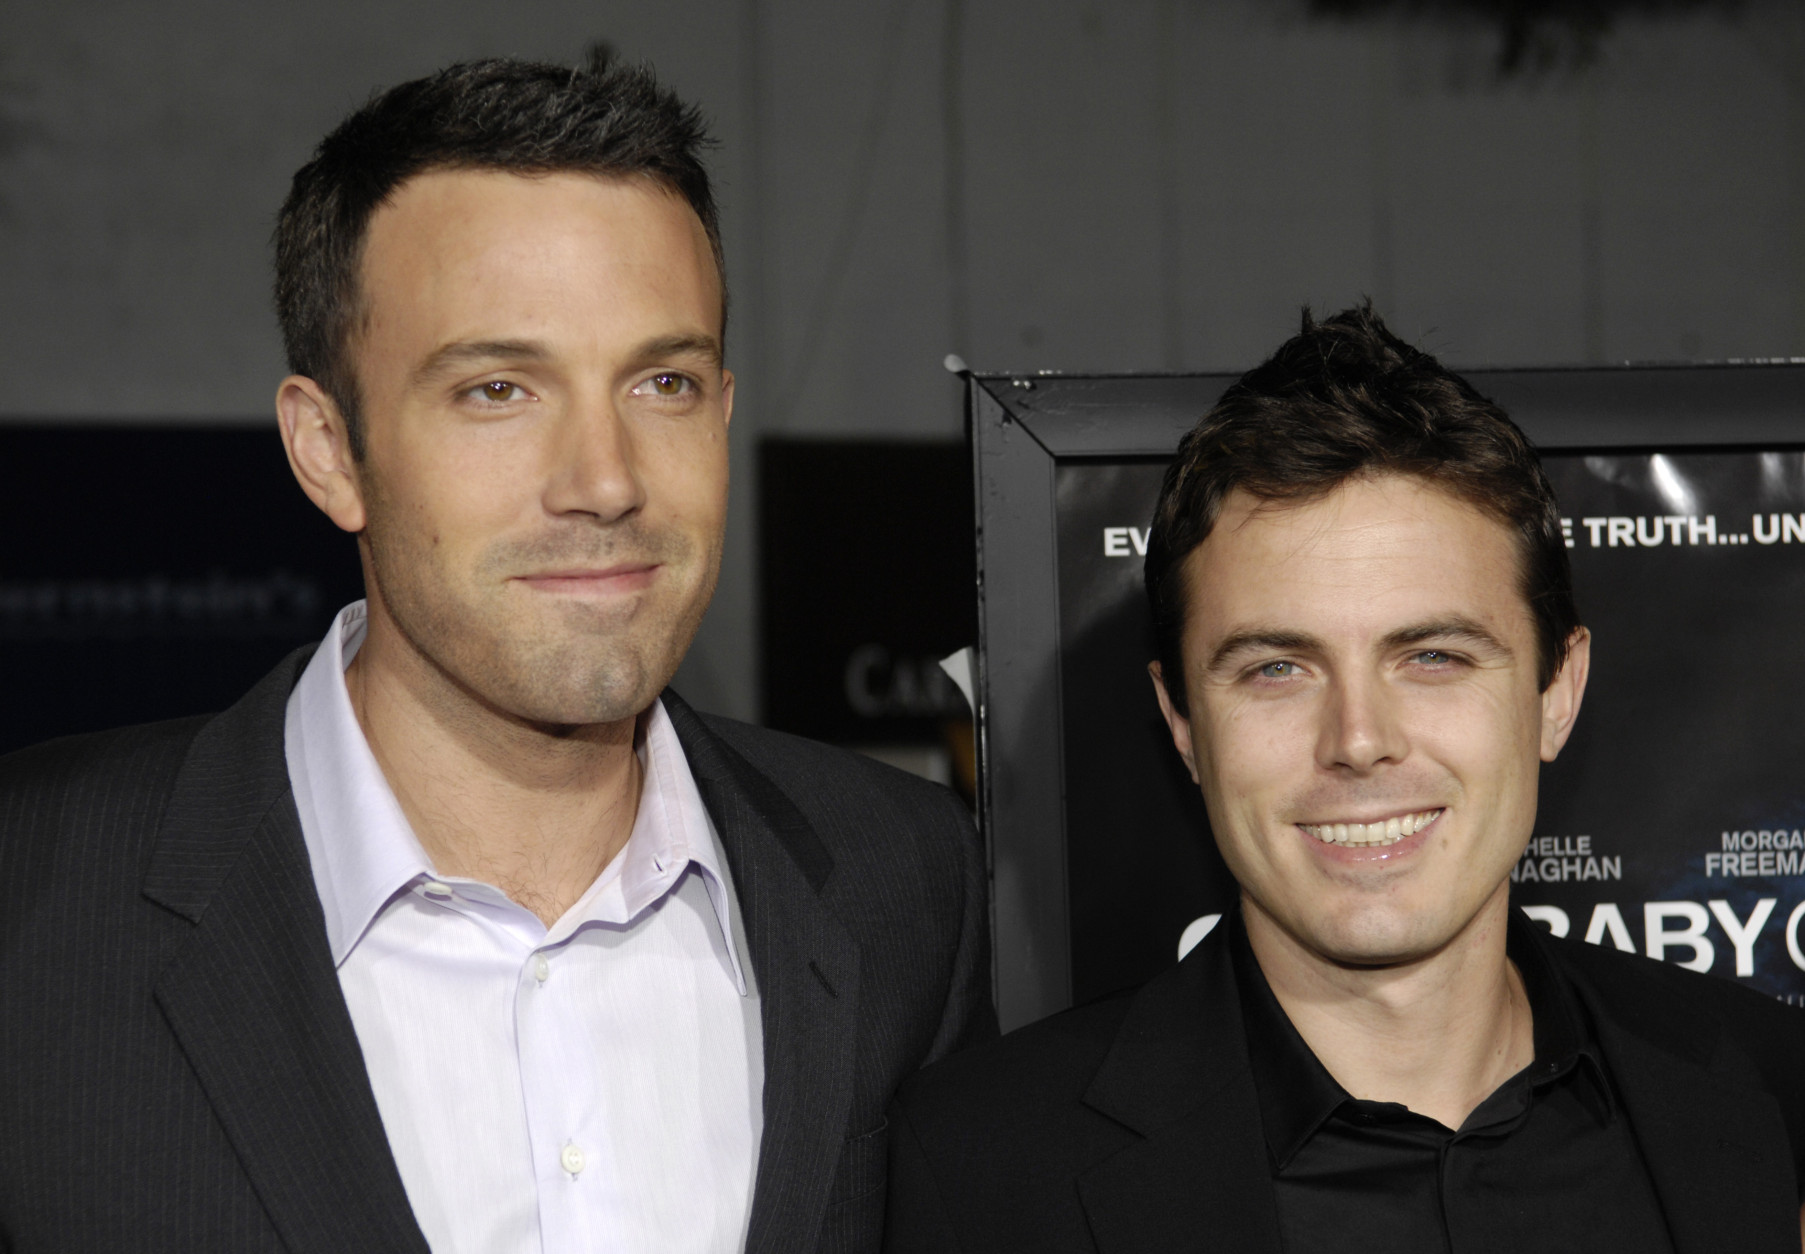 "Gone Baby Gone" director Ben Affleck, left, and his brother, cast member Casey Affleck, pose together at the Los Angeles premiere of the film, Monday, Oct. 8, 2007. (AP Photo/Chris Pizzello)